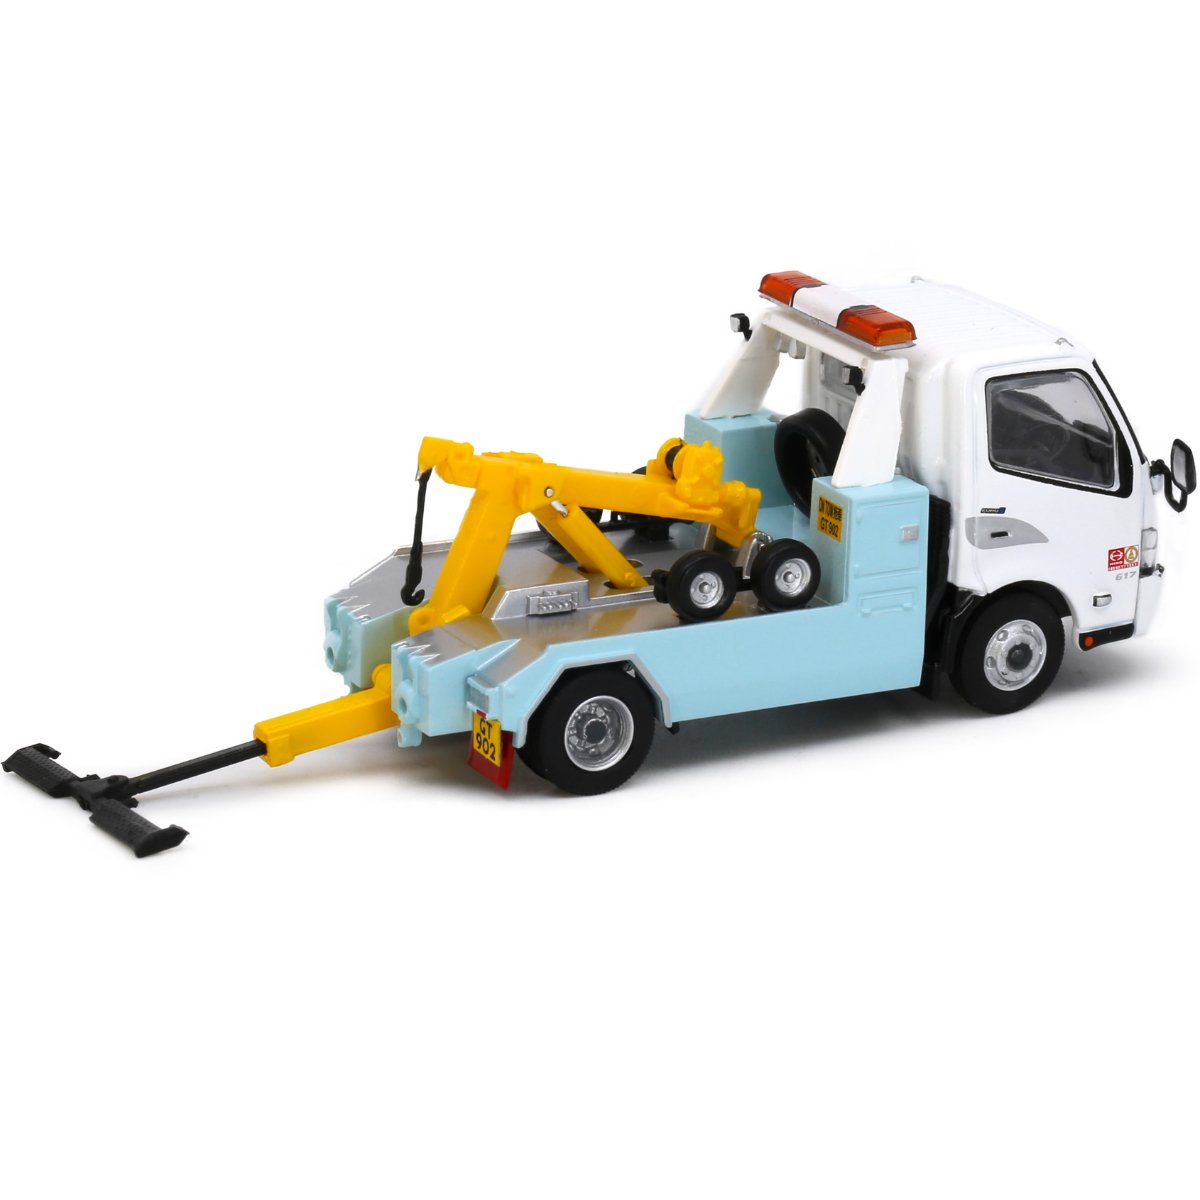 Tiny Models Hino 300 Tow Truck (1:64 Scale) - Phillips Hobbies